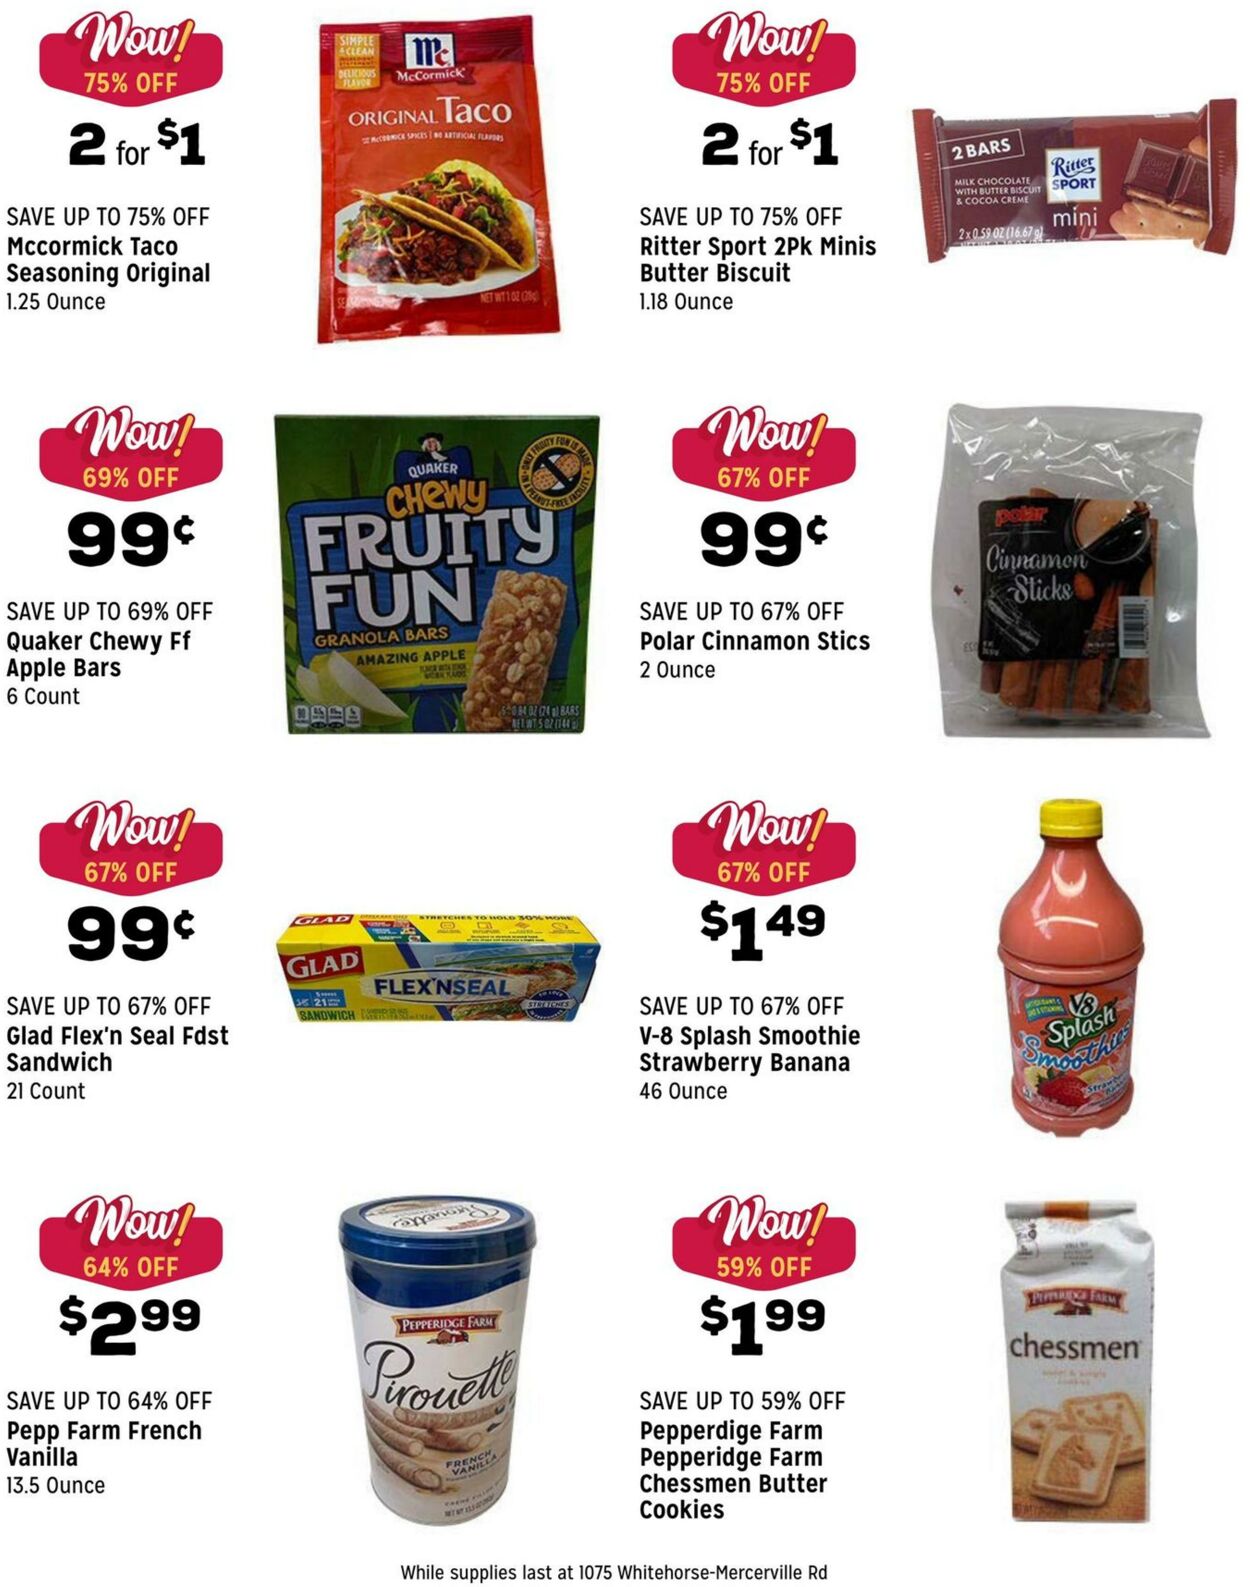 Weekly ad Grocery Outlet 09/07/2022 - 09/13/2022